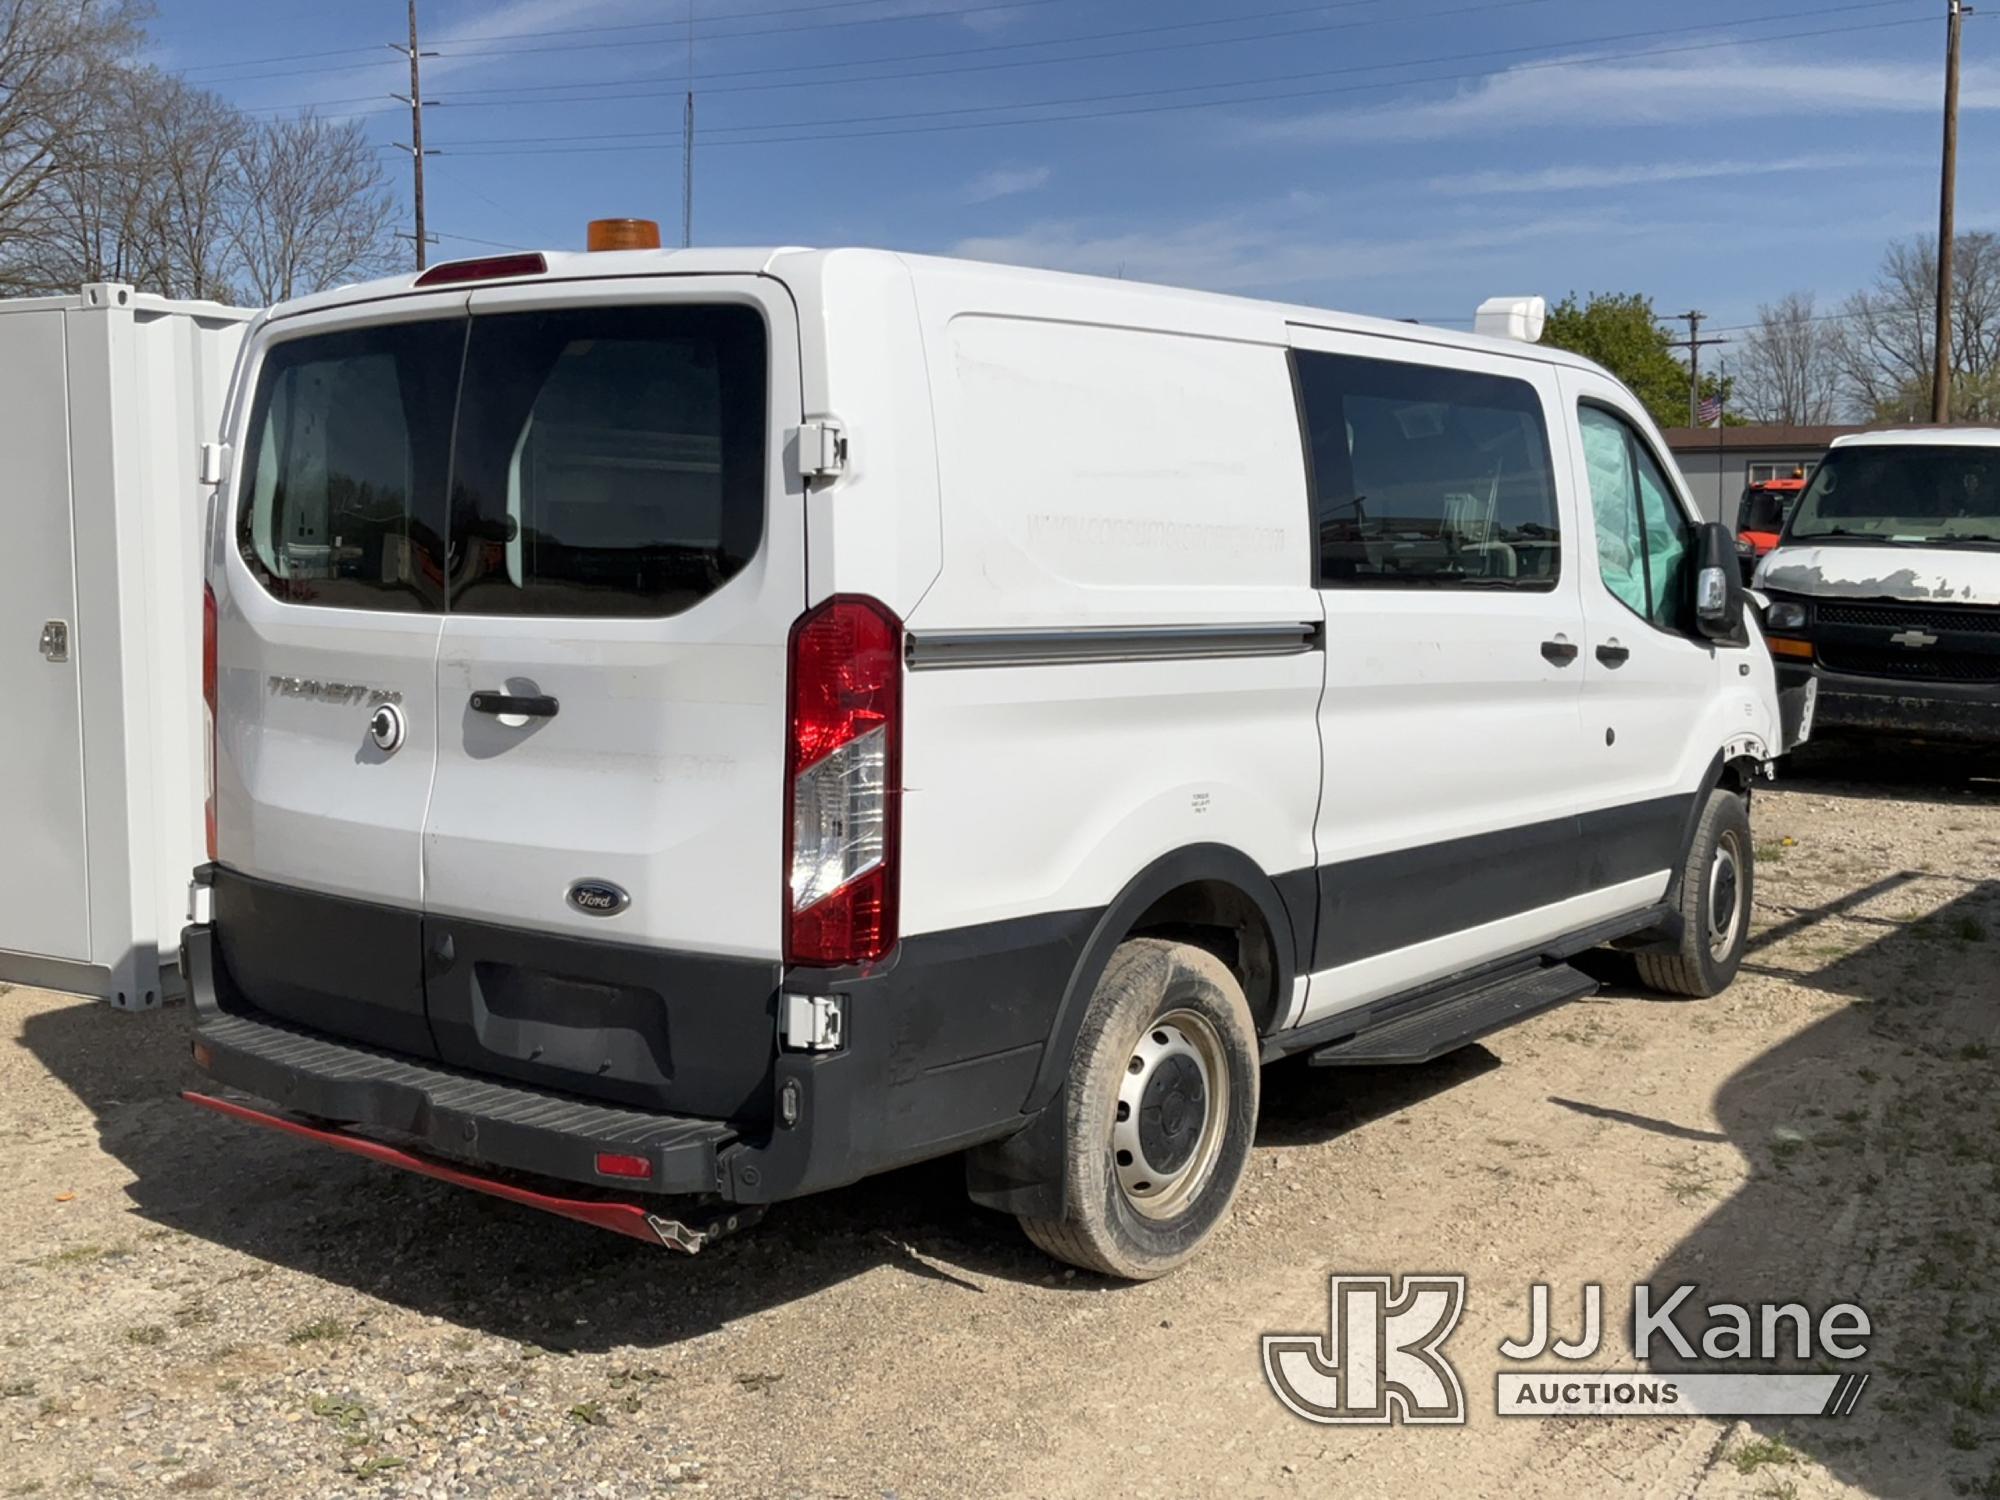 (Charlotte, MI) 2019 Ford Transit-250 Cargo Van Condition Unknown, Wrecked, All Airbags Deployed, BU